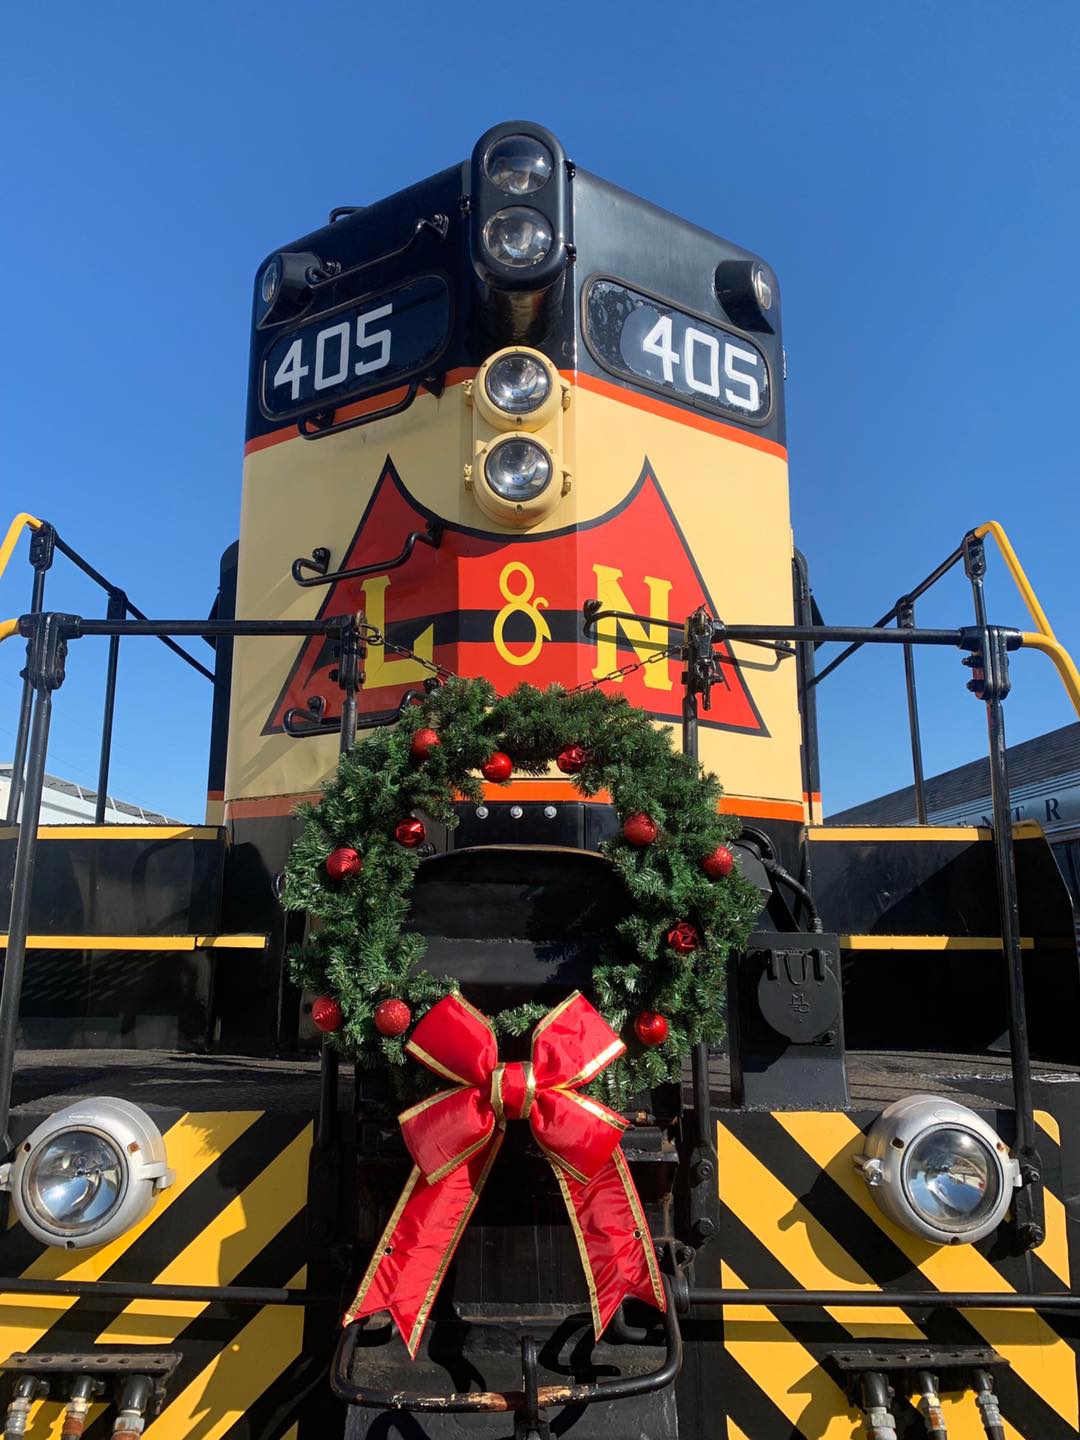 the polar express train in nashville tn with a wreath on the front of the train